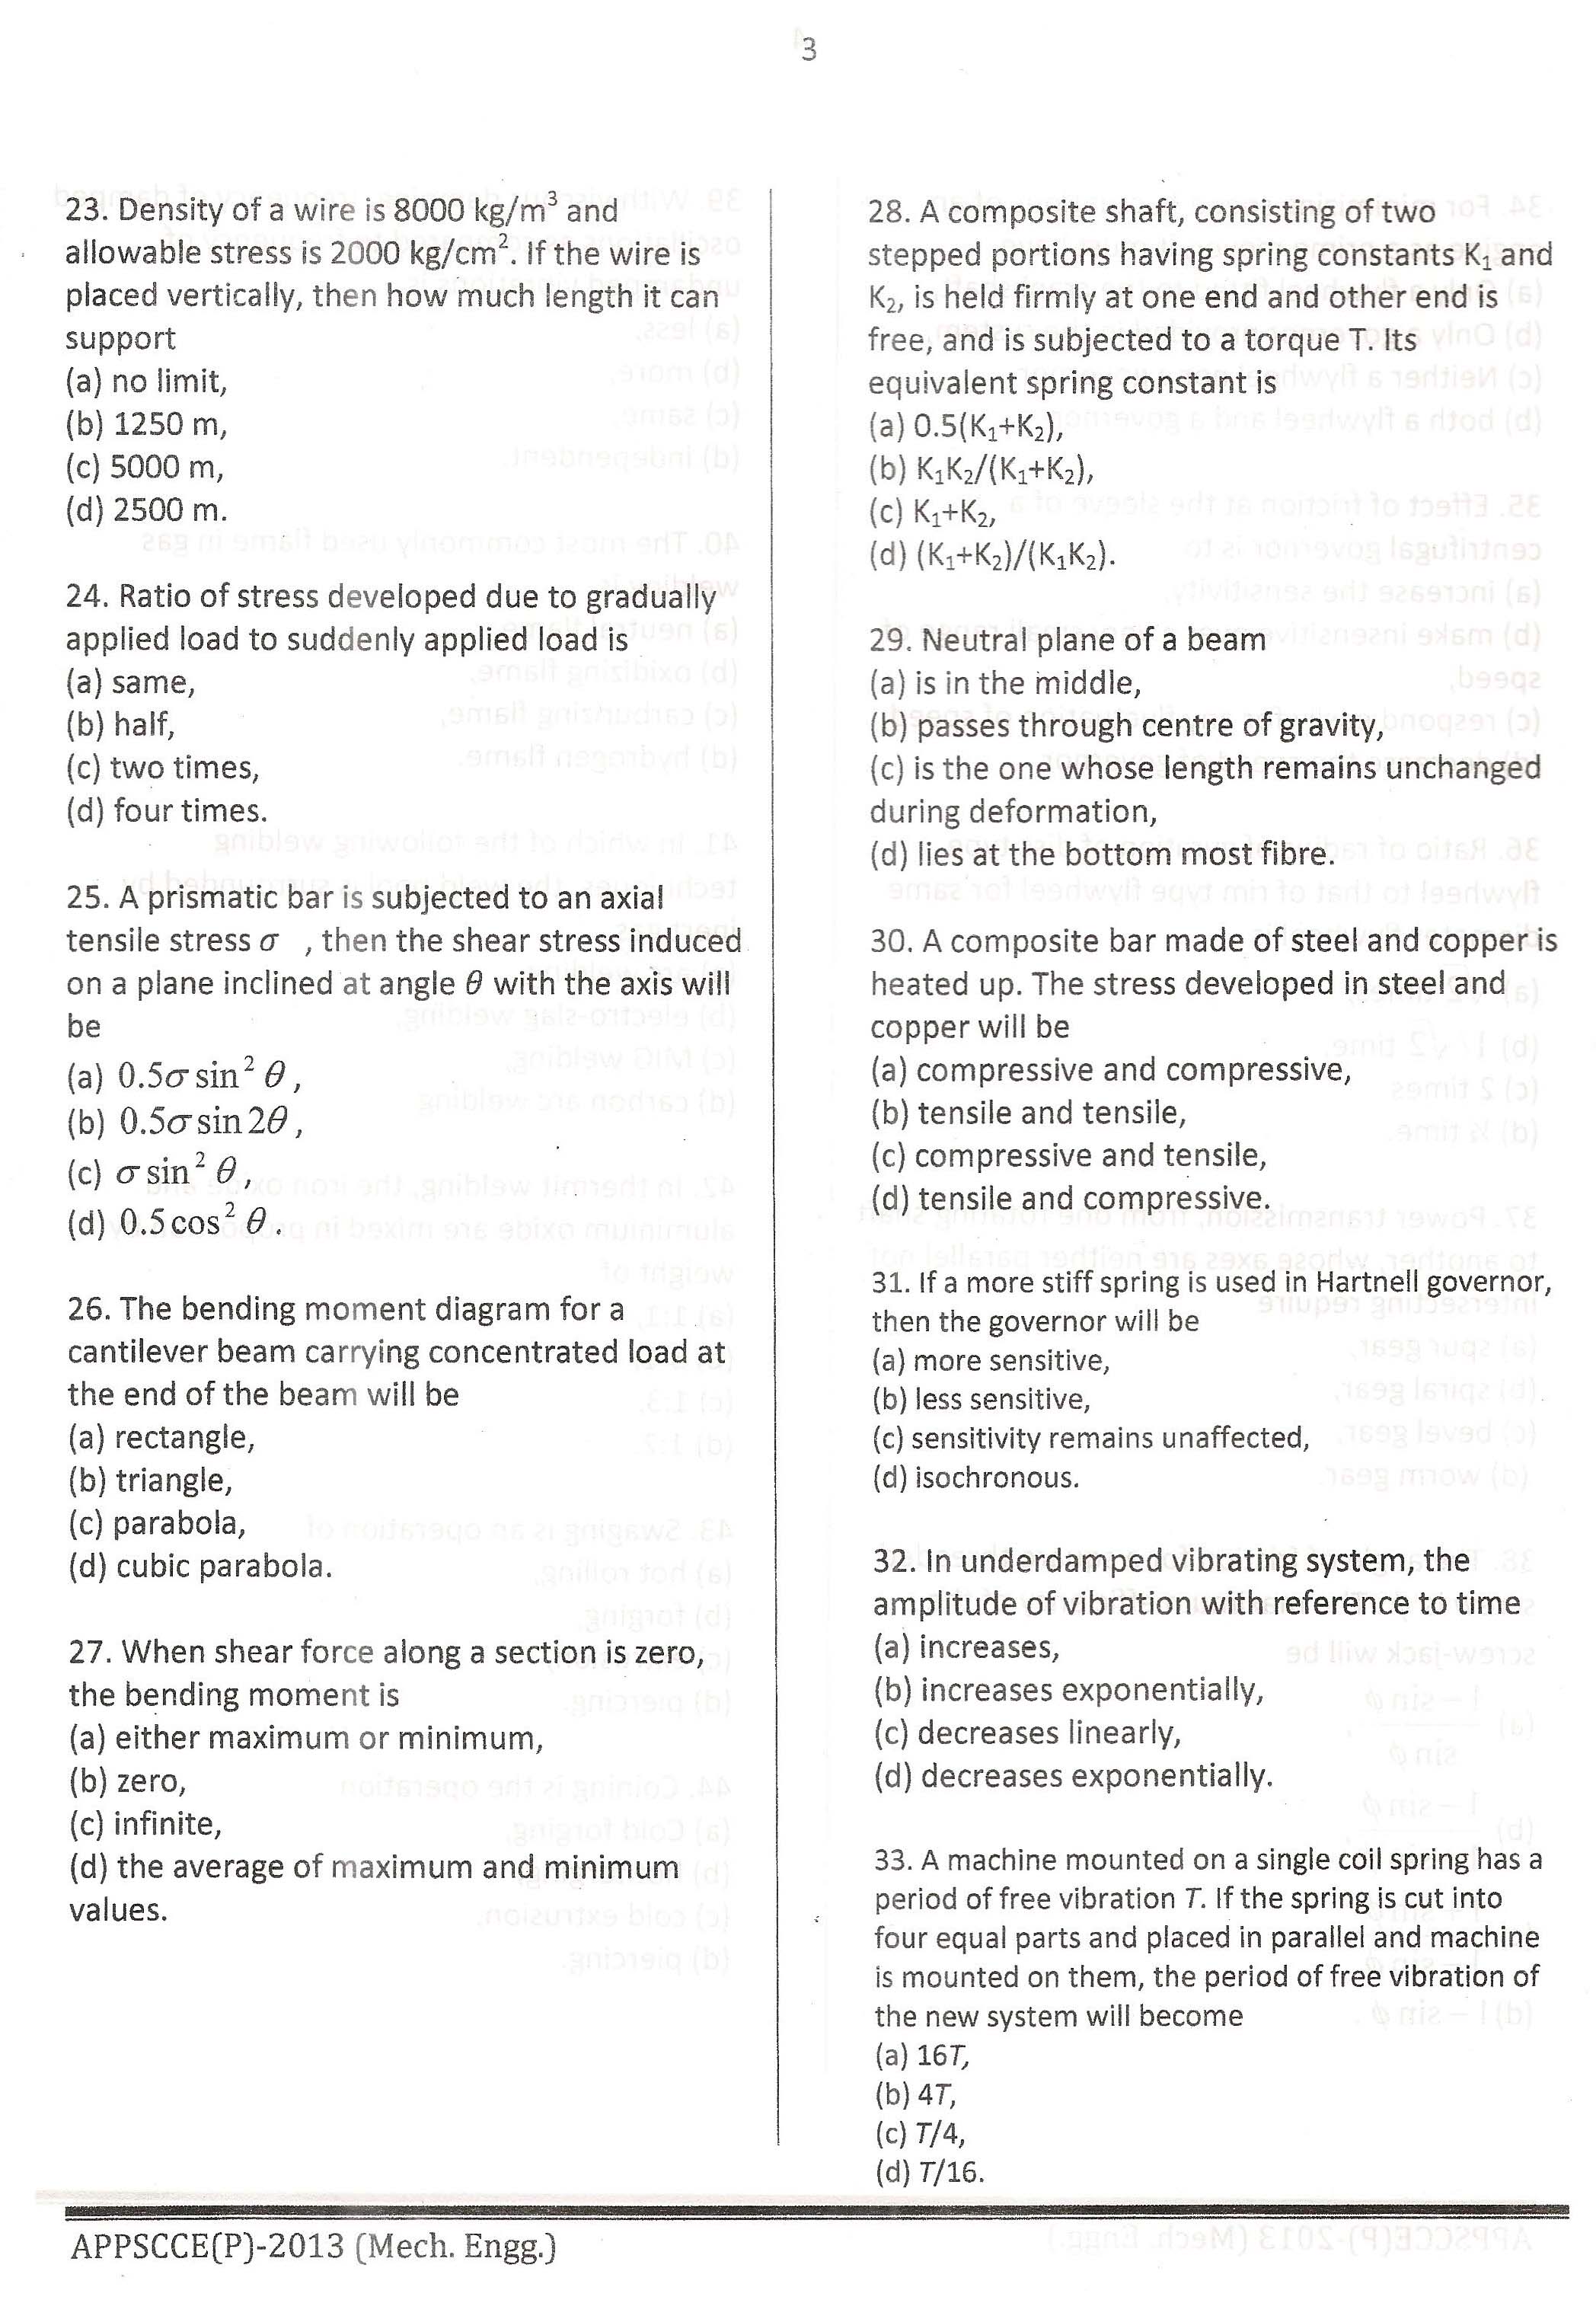 APPSC Combined Competitive Prelims Exam 2013 Mechanical Engineering 4